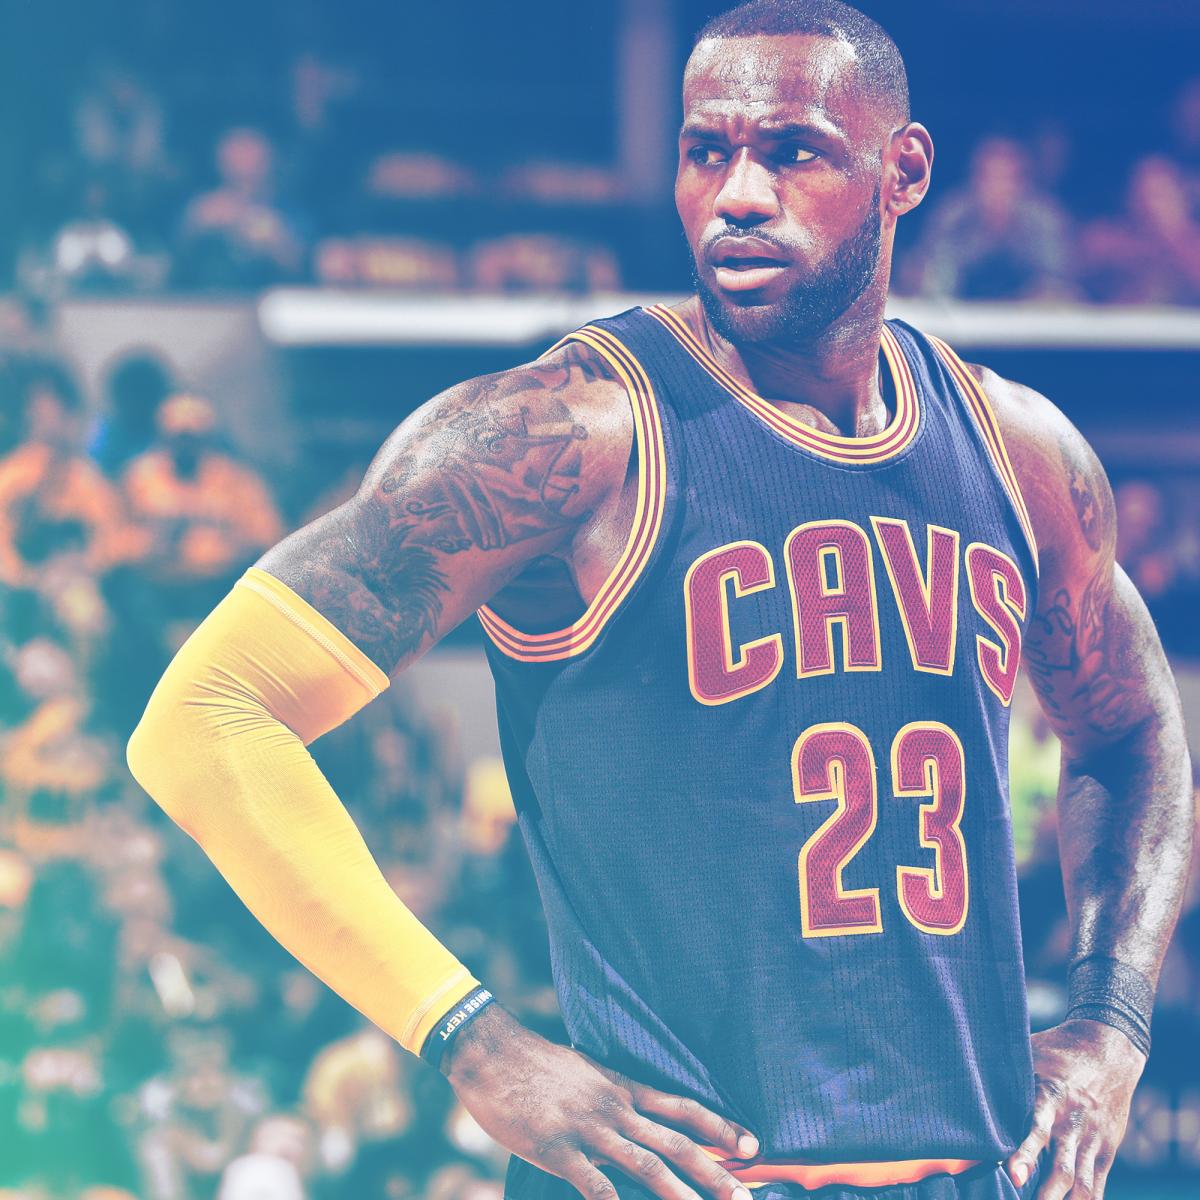 Lebron James Scored More Playoff Points Than 7 Franchises in NBA